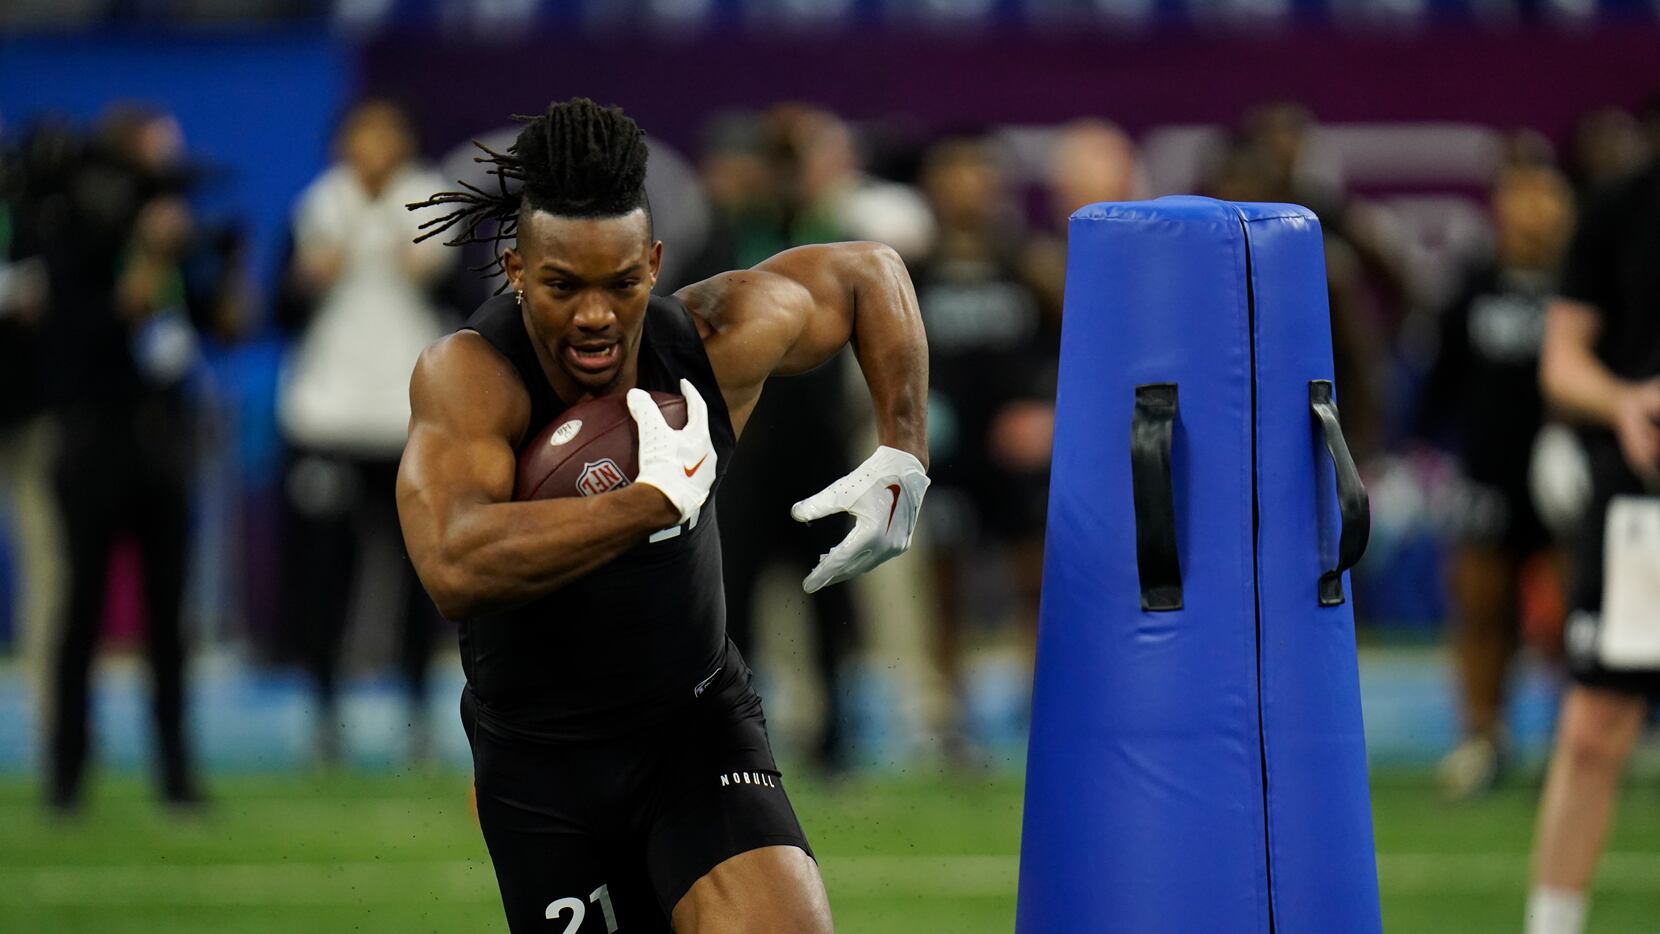 Behind-the-scenes: 2020 NFL Scouting Combine